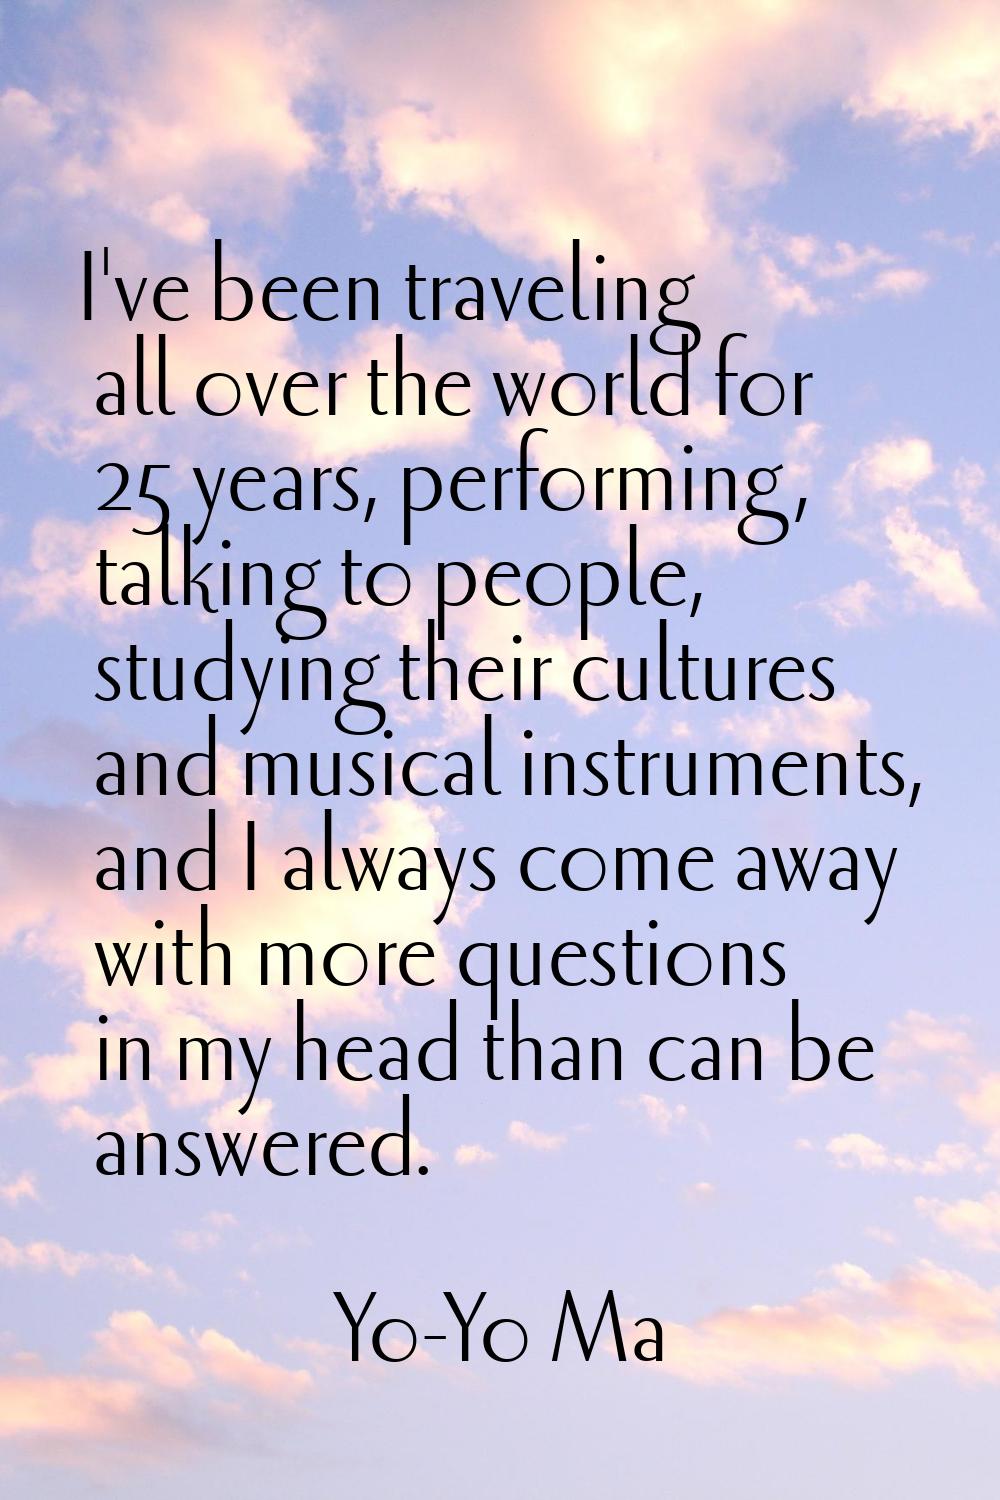 I've been traveling all over the world for 25 years, performing, talking to people, studying their 